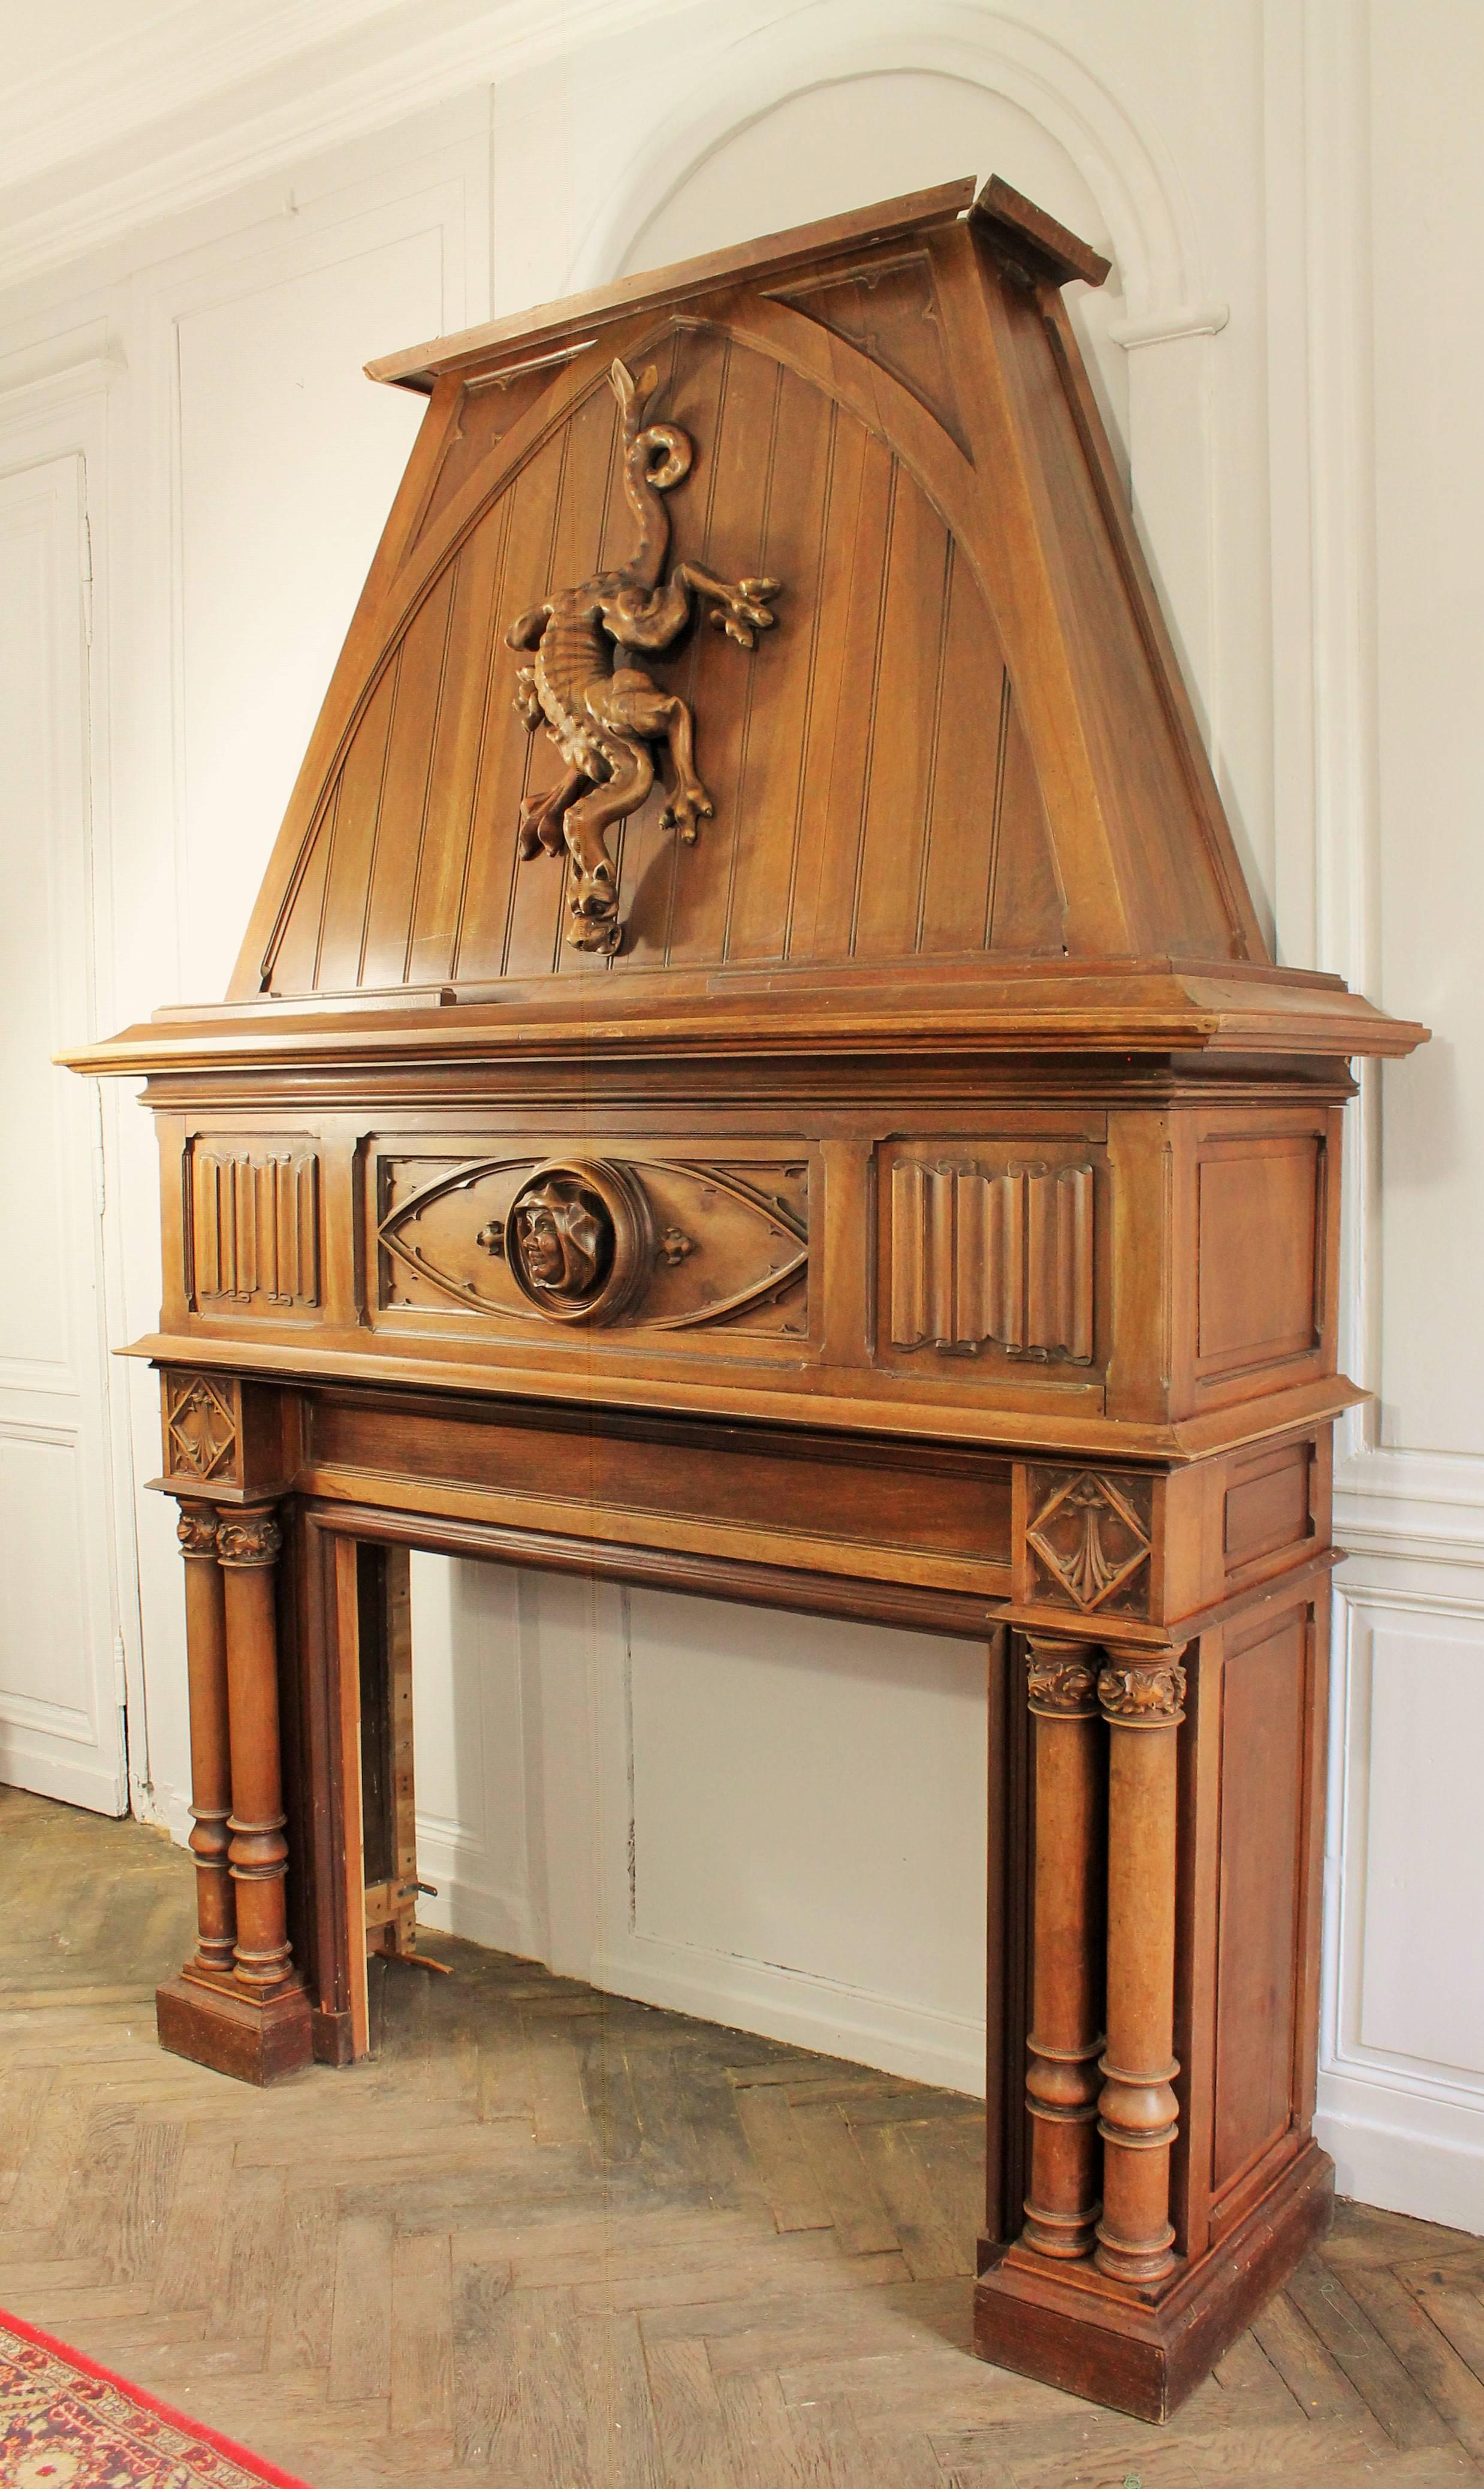 Oak Gothic Revival Fireplace with its Hood and Carved Salamander, Witch and Ermine For Sale